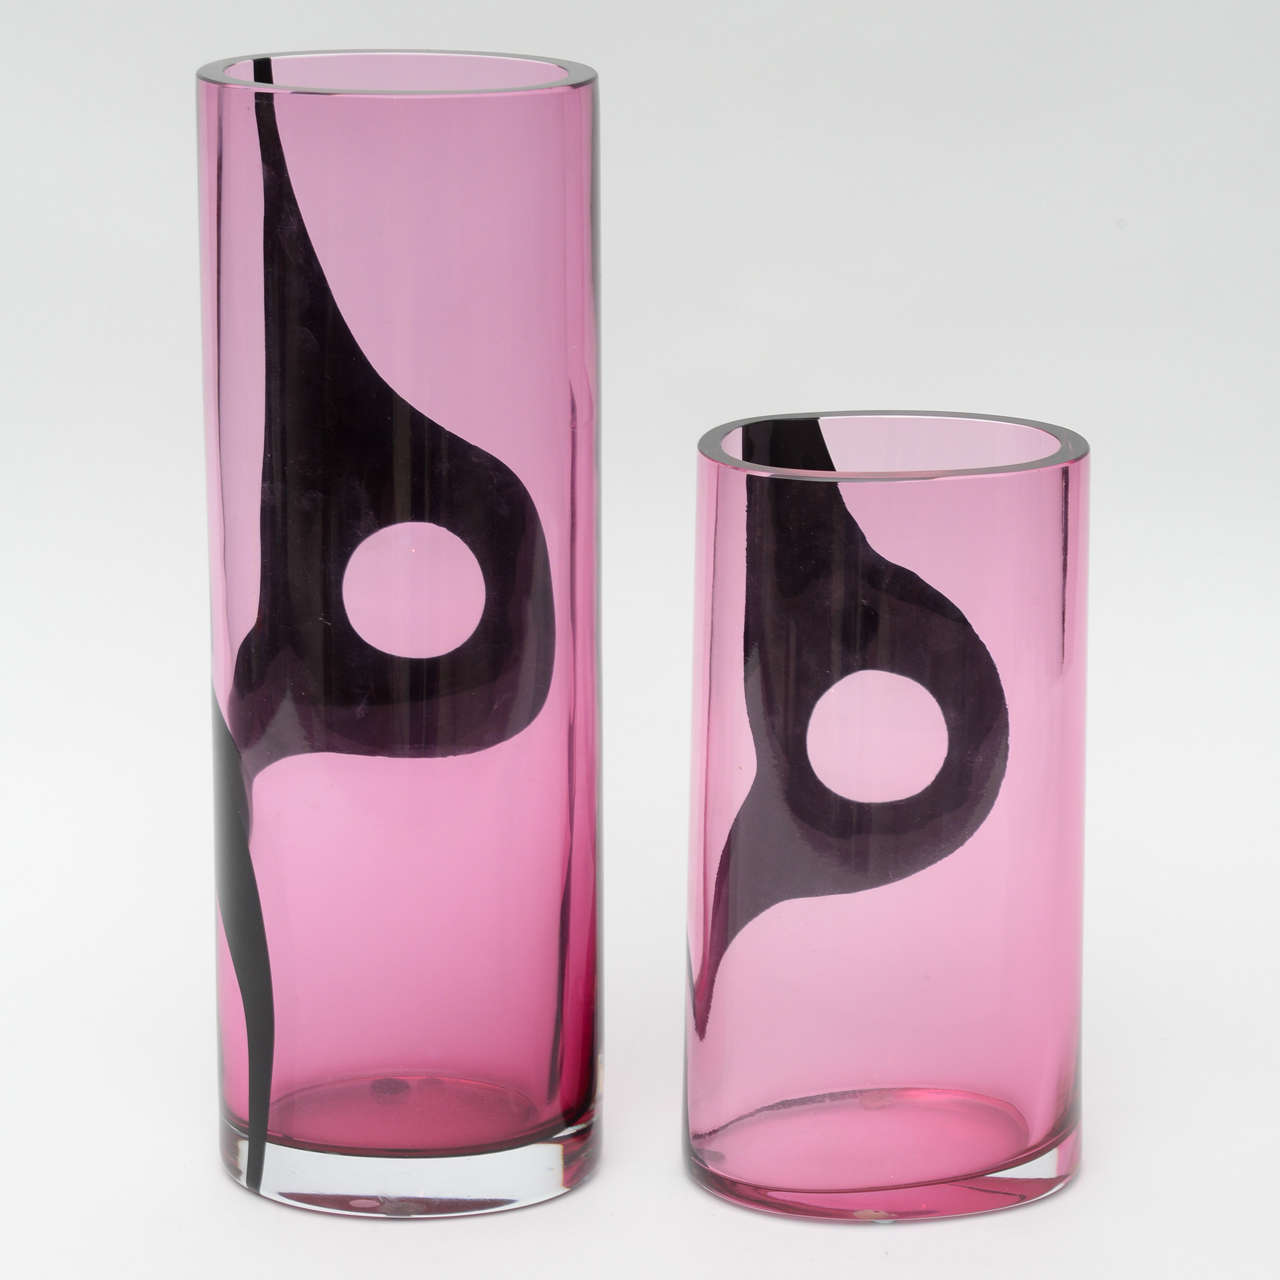 Italian modern art glass vases in lilac and black, both marked to underside, Seguso, can be sold separately.
Larger 16